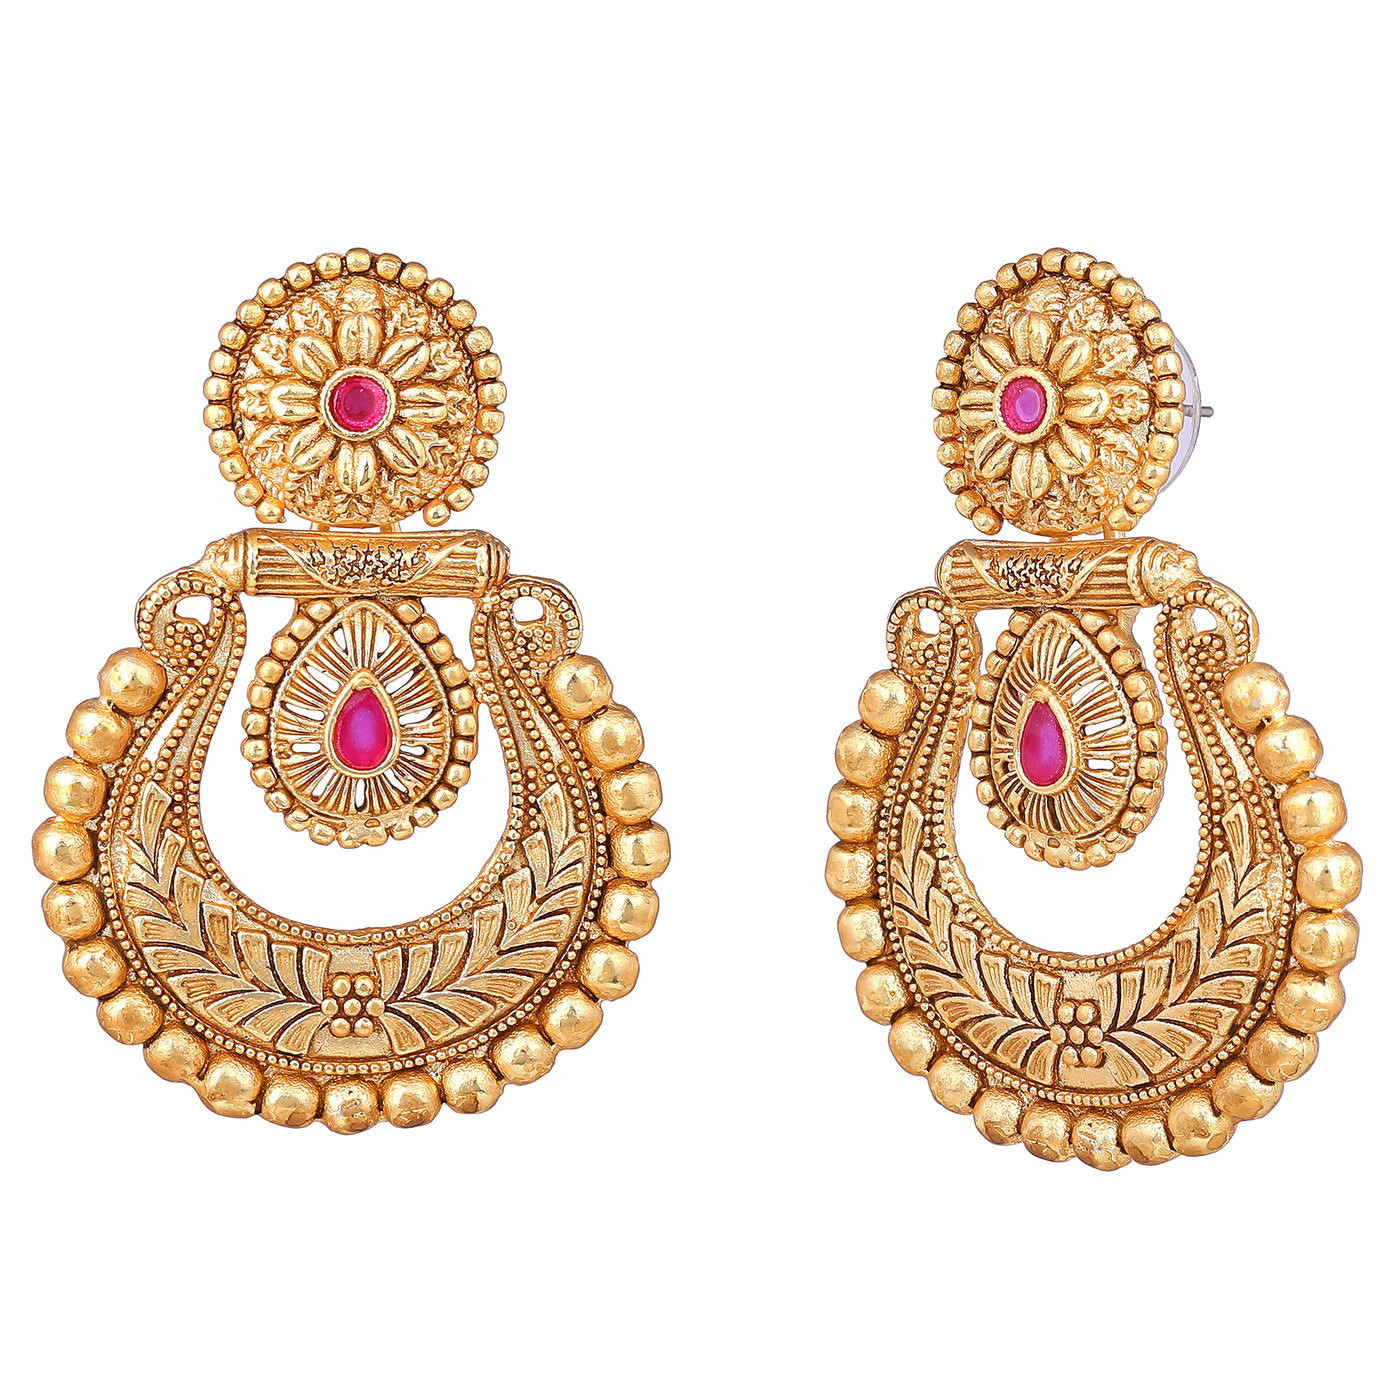 Estele Gold Plated Beautiful Matt Finish Drop Earrings with Ruby Crystals for Women